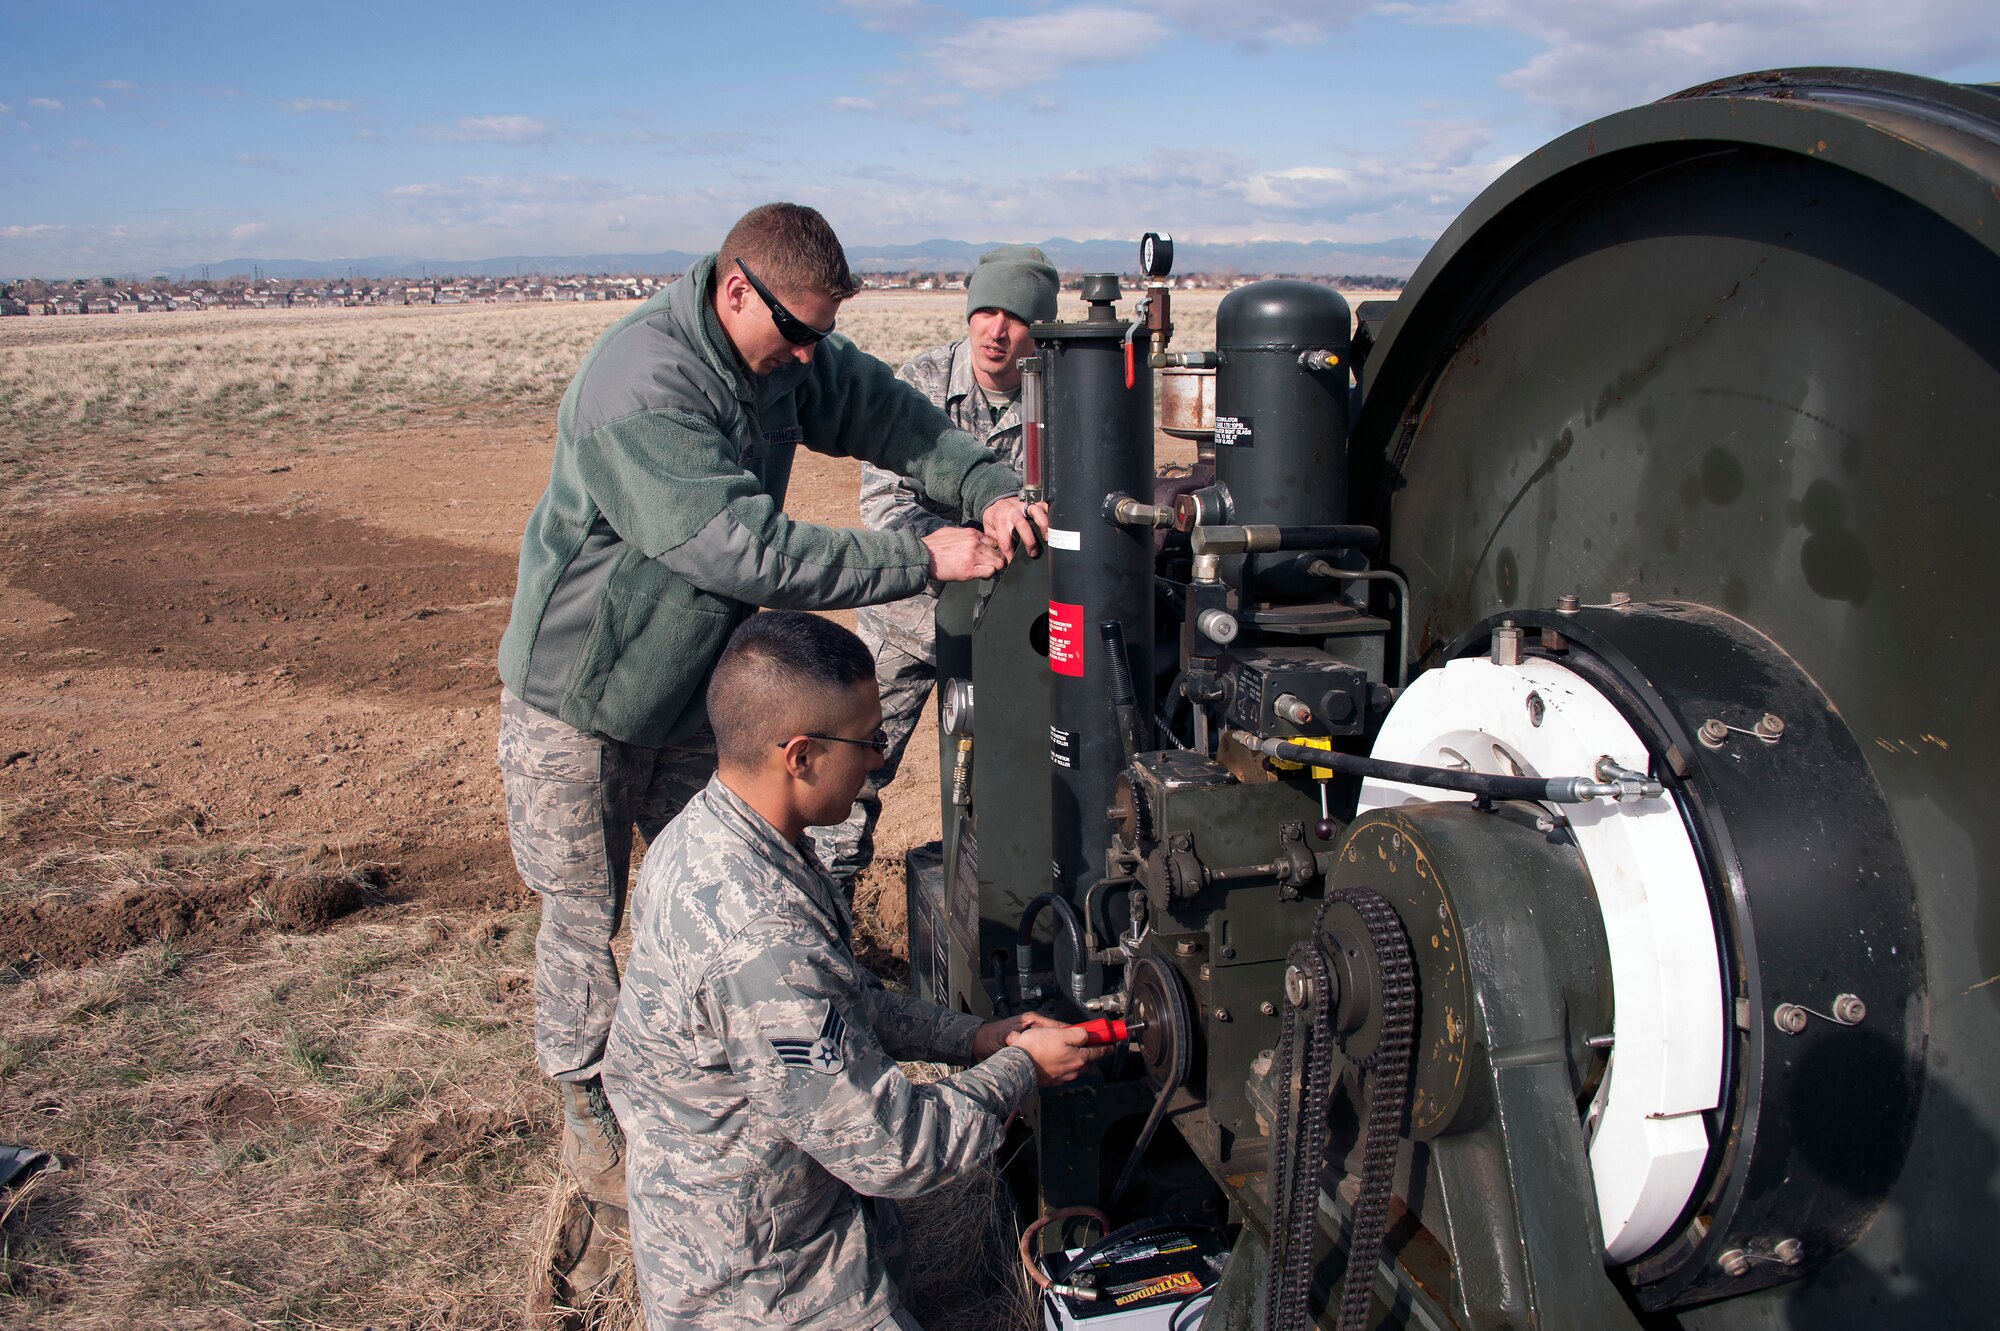 Civil Engineers and a Red Horse Unit are working together to install a BAK-12, Expeditionary Aircraft Arresting System on the main runway at Buckley Air Force Base.  The temporary system must be installed prior to any construction taking place on the runway and so the permanent arresting systems can be upgraded. Senior Airman Jesus Martinez (near) from the 460th Space Warning Squadron, Staff Sgt. Alex Atkins (center) from the 140th Wing and Staff Sgt. Issac Strickler from the 200th Red Horse unit adjust the braking system of the BAK-12 Aircraft Arresting system as part of the installation process.  (U.S. Air National Guard photo by Senior Master Sgt. John Rohrer)